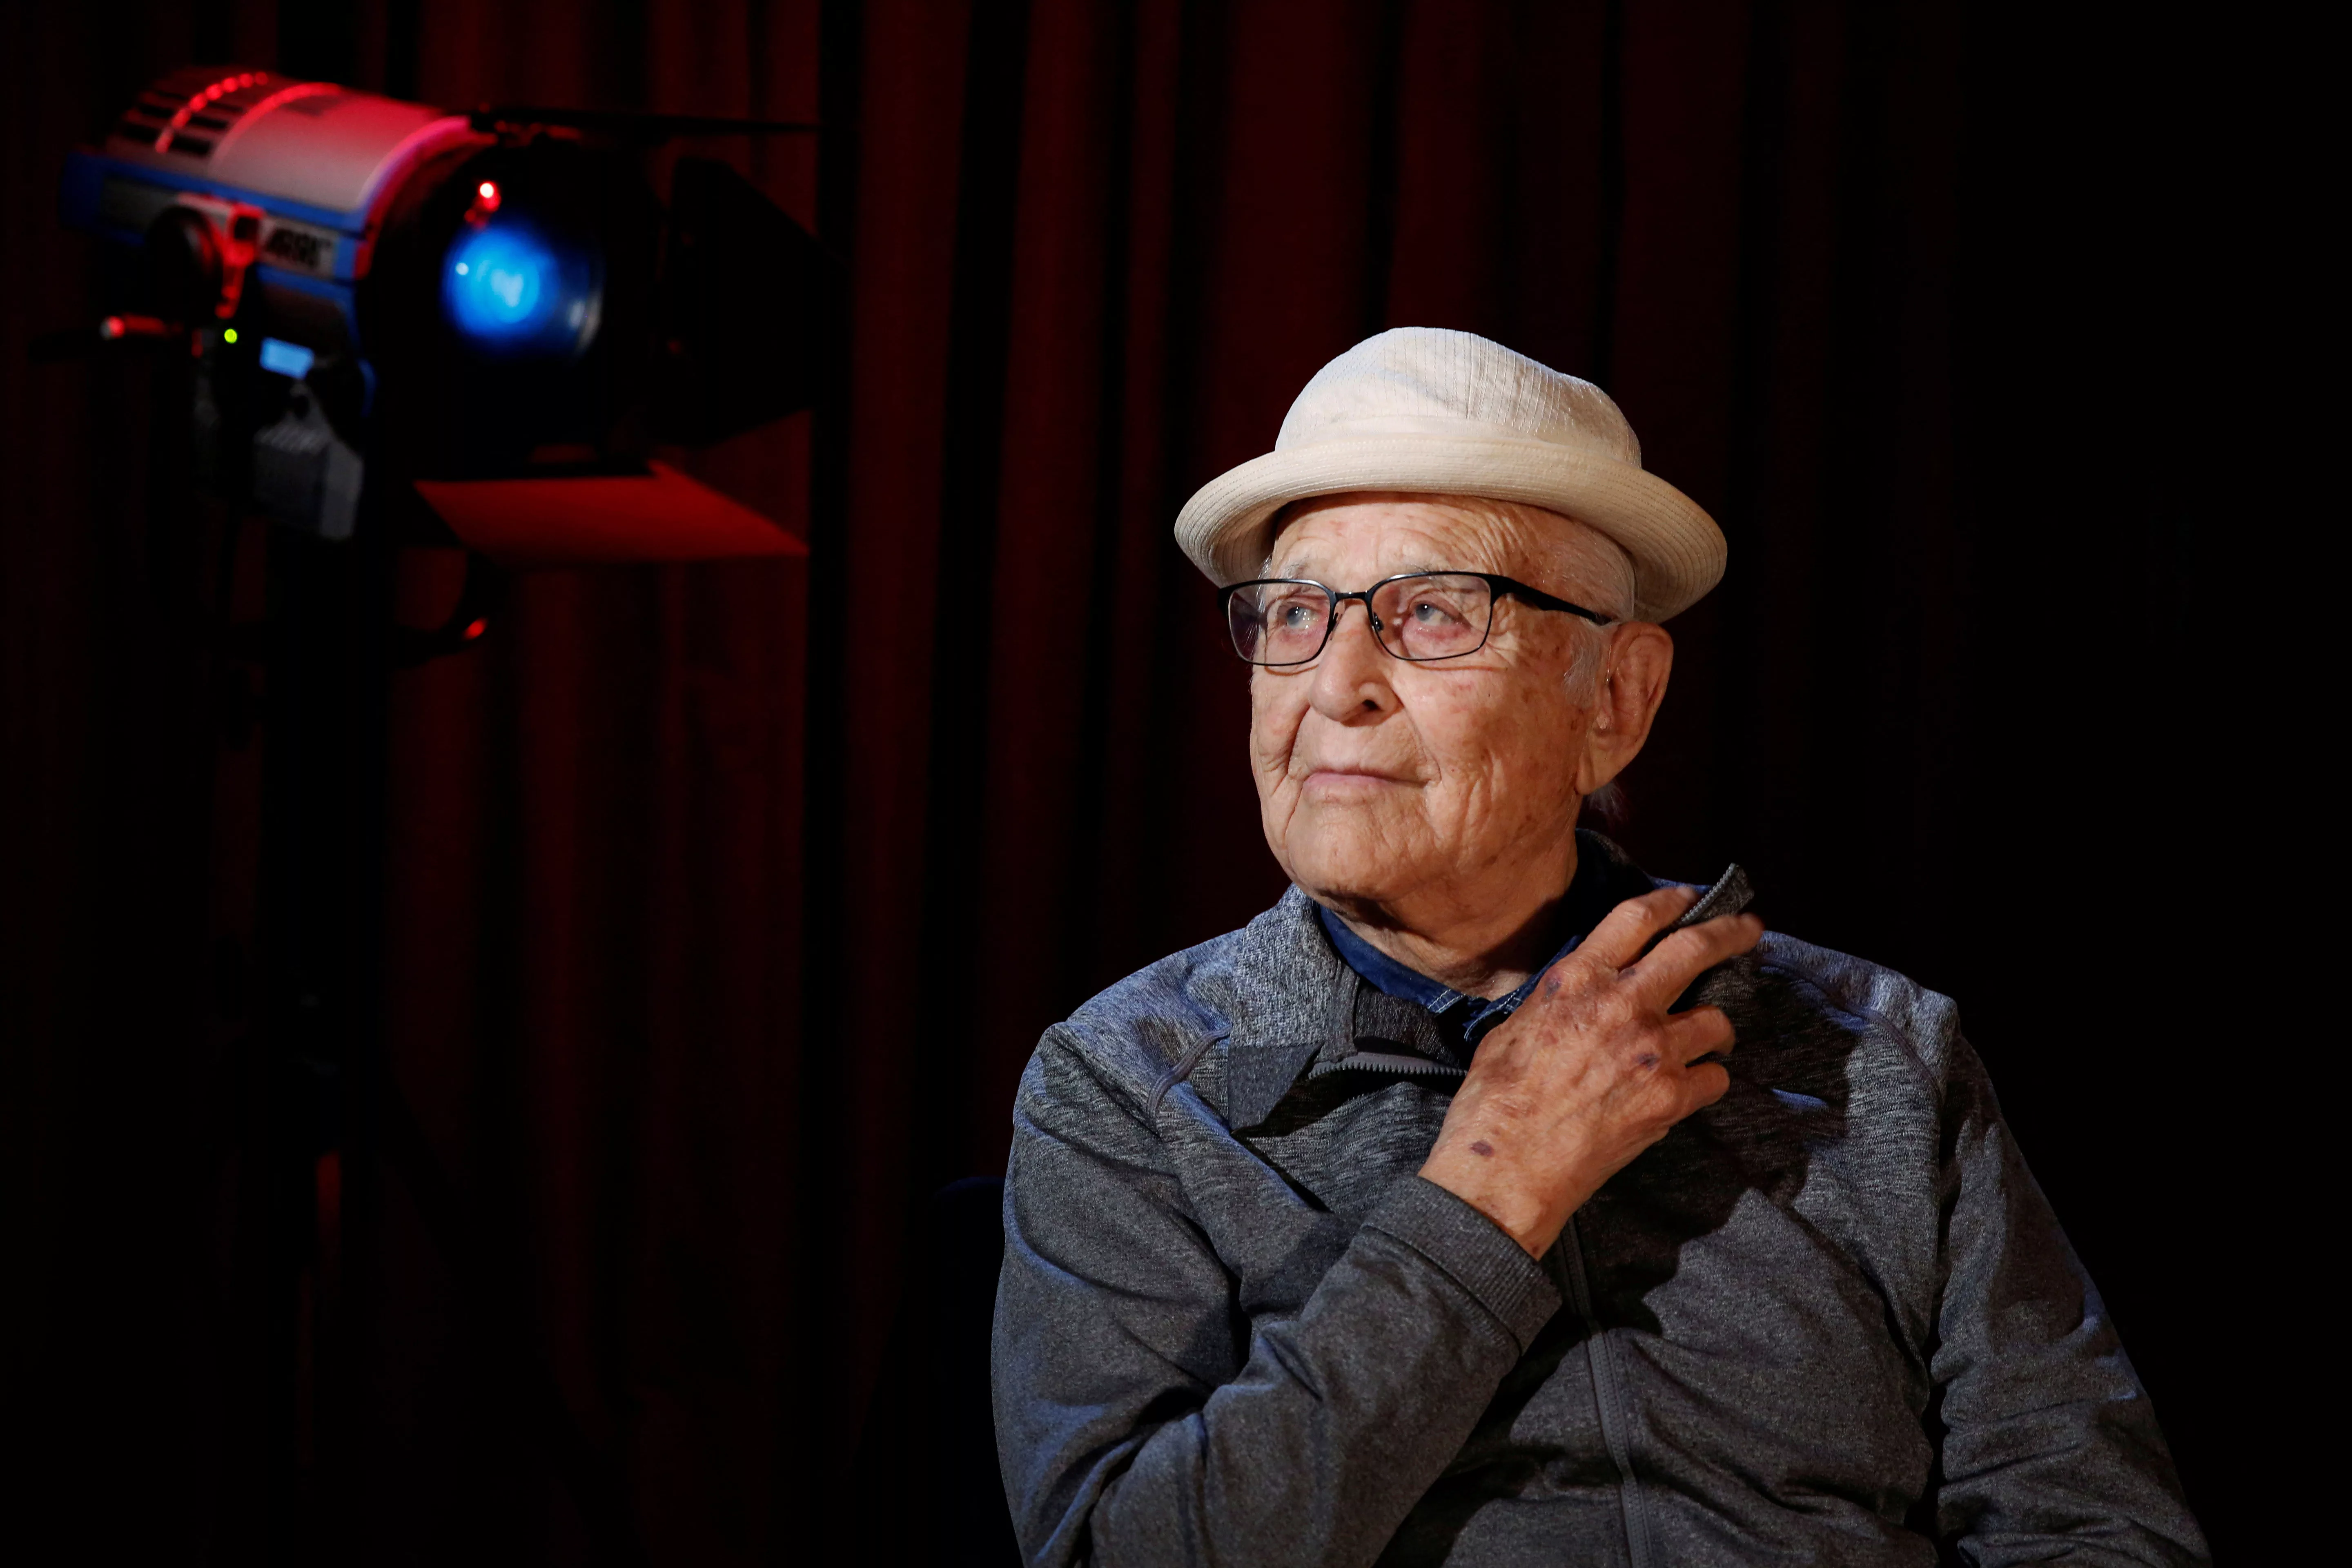 file-photo-television-producer-norman-lear-poses-for-a-portrait-in-new-york